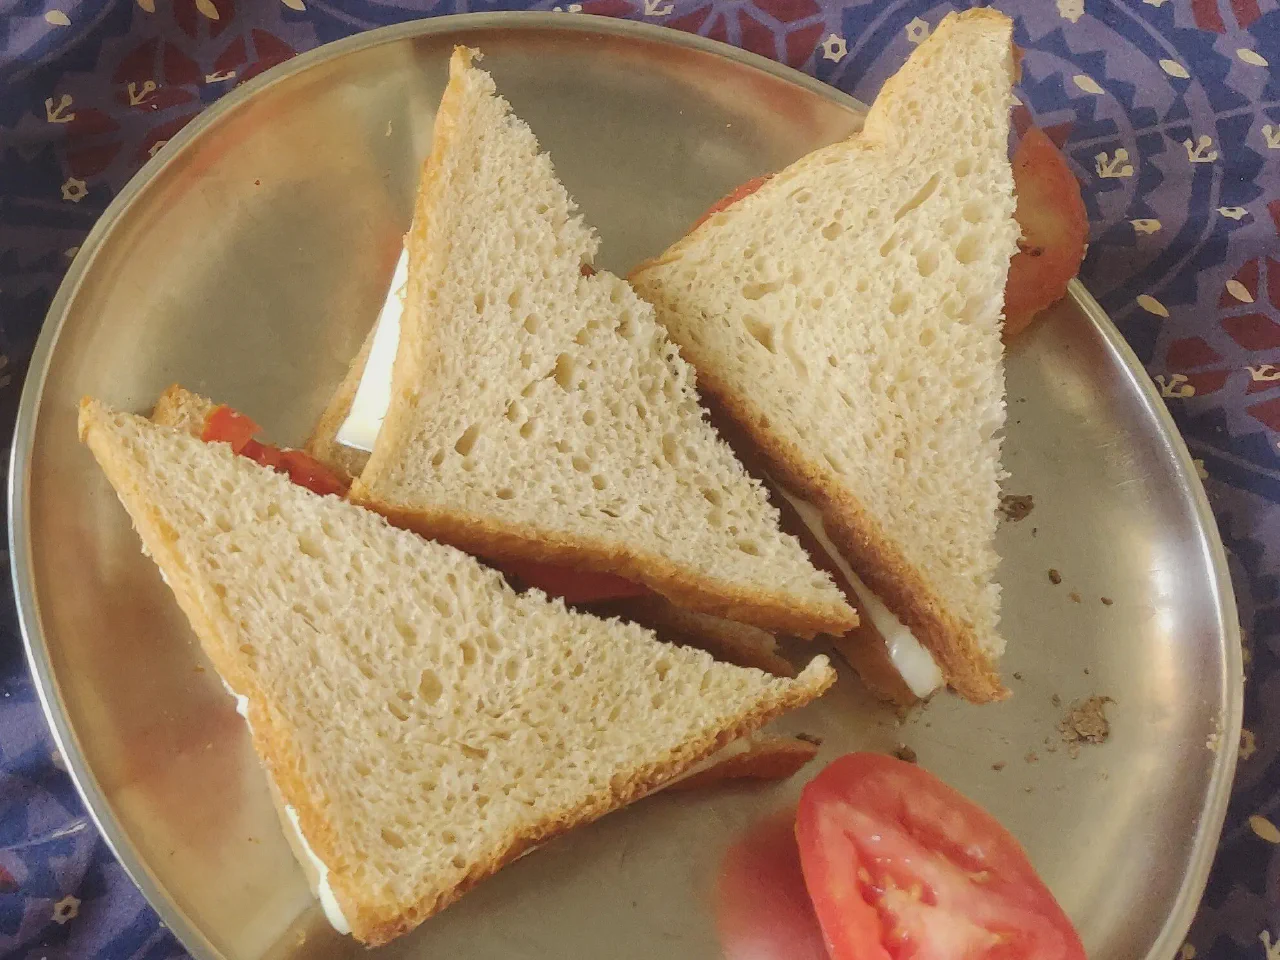 Tomato cheese sandwiches, cut and ready-to-eat.